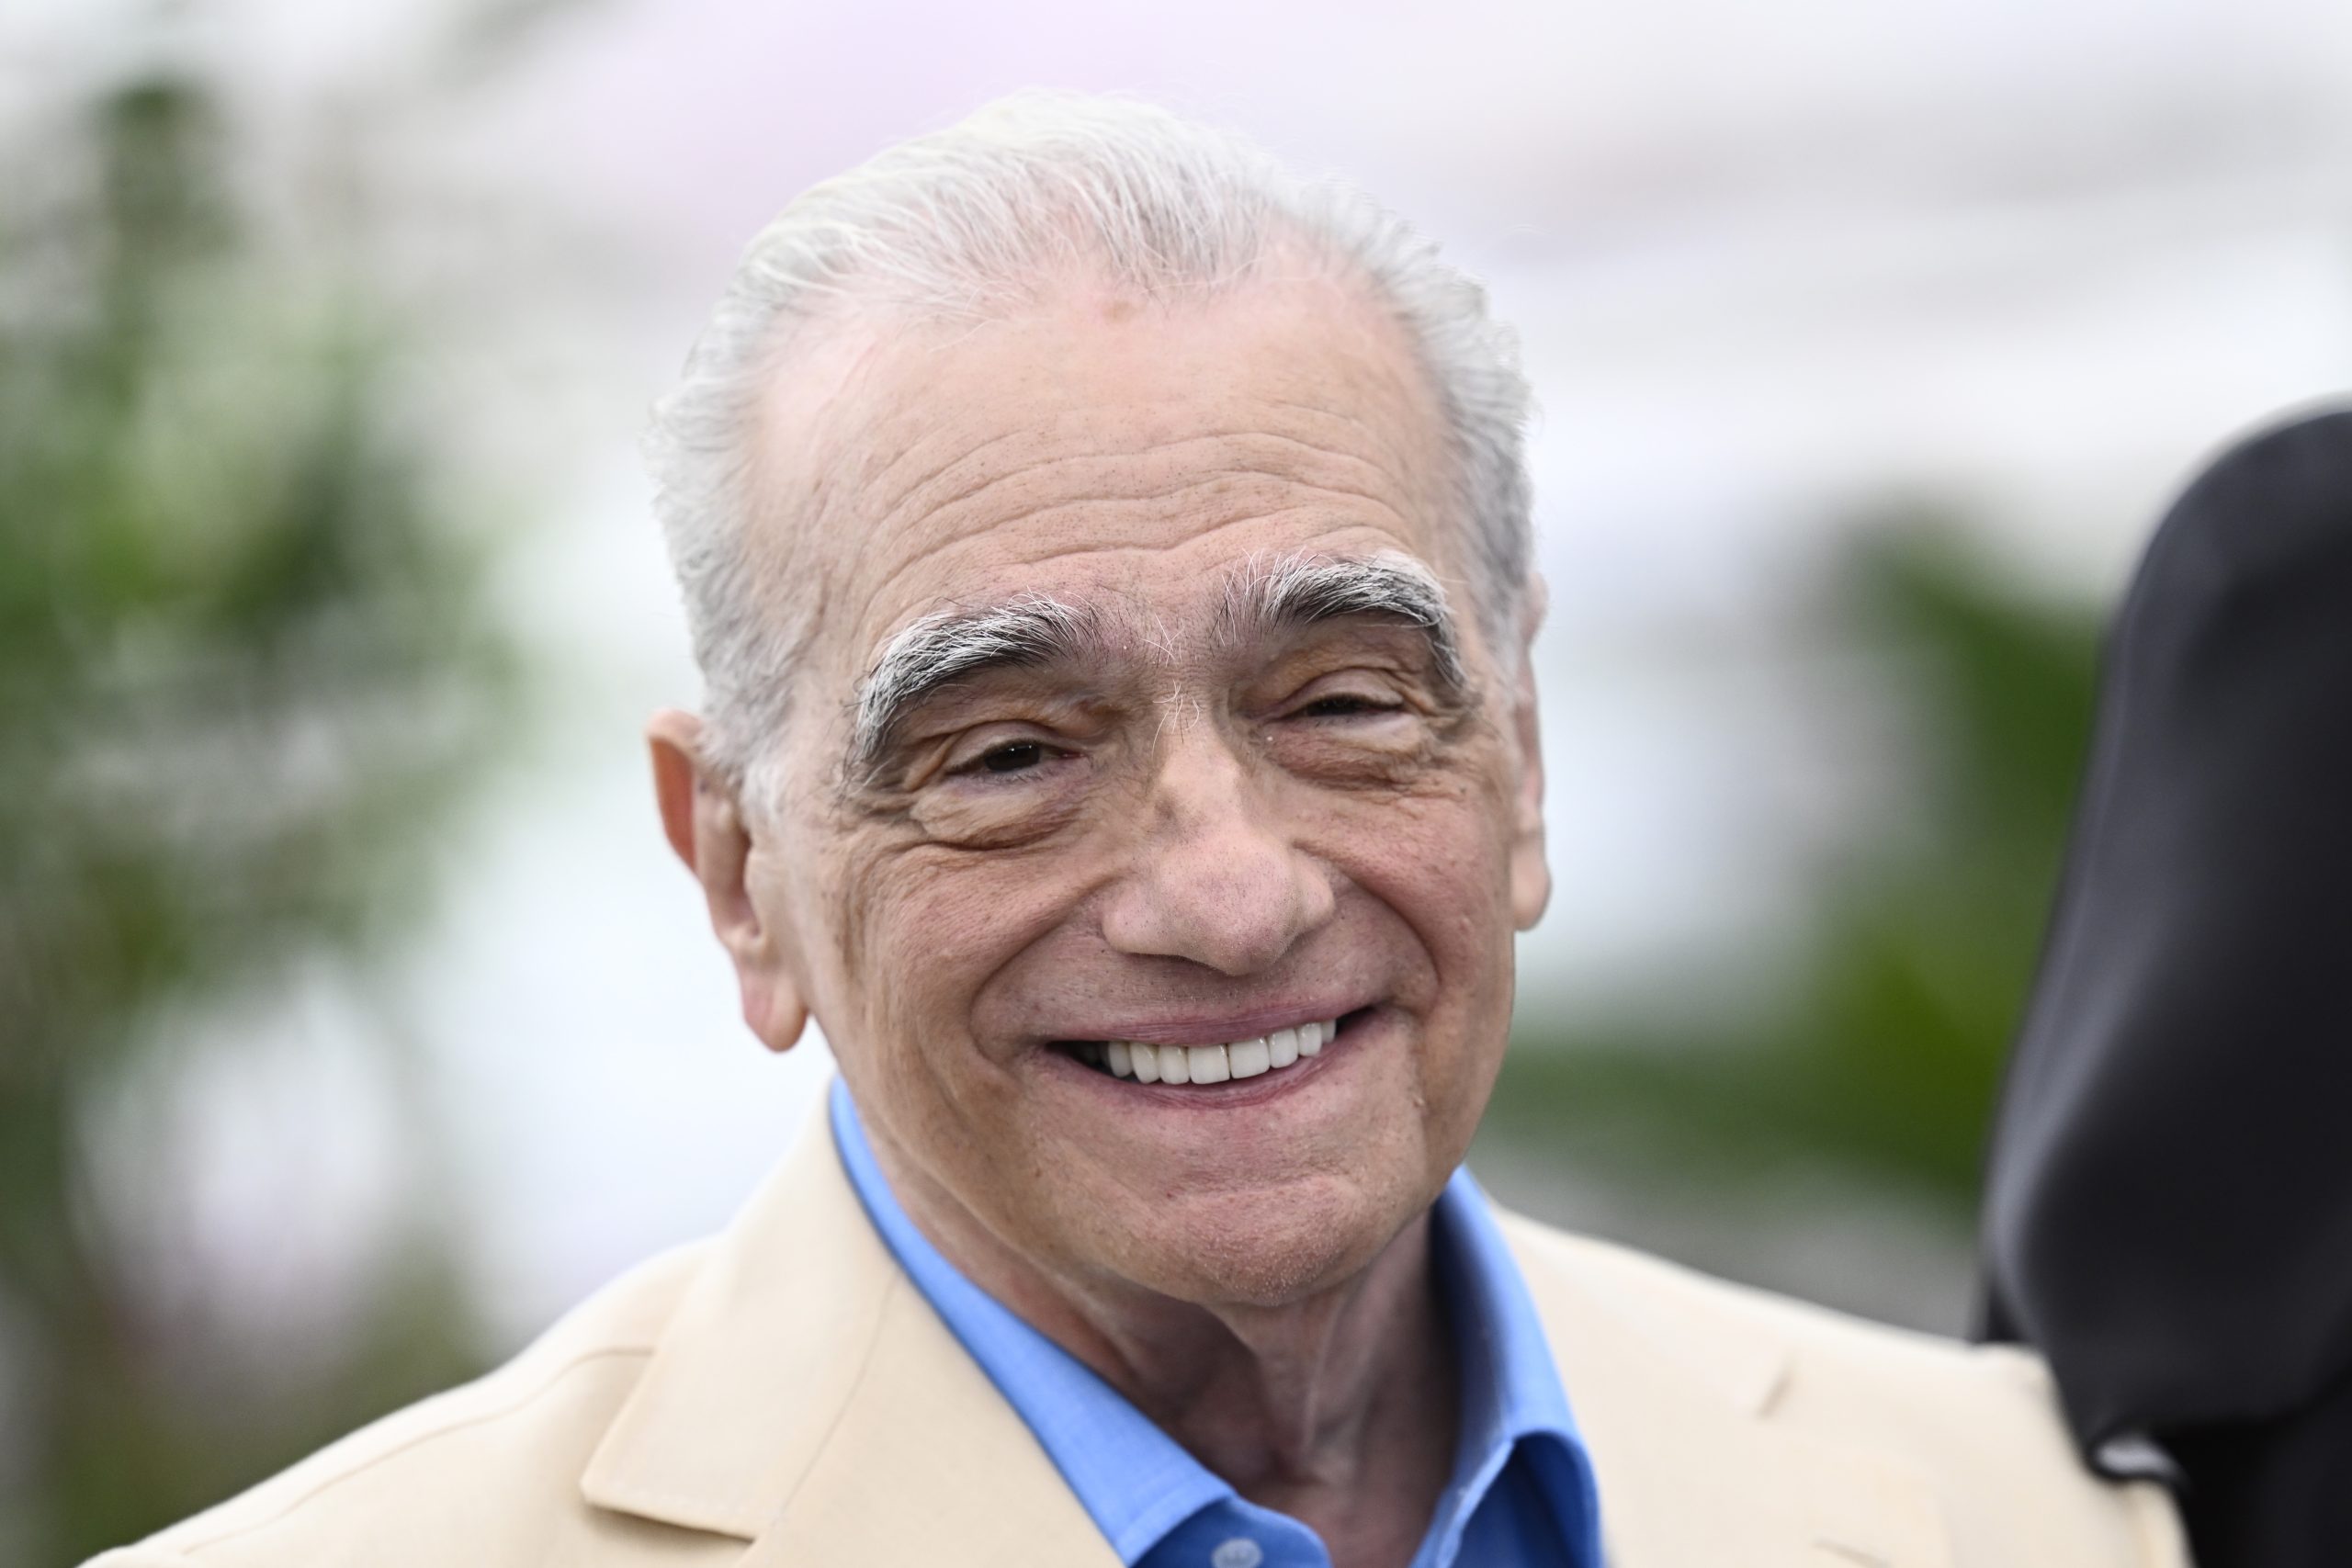 CANNES, FRANCE - MAY 21: Director Martin Scorsese attends the "Killers Of The Flower Moon" photocall at the 76th annual Cannes film festival at Palais des Festivals on May 21, 2023 in Cannes, France. (Photo by Gareth Cattermole/Getty Images)